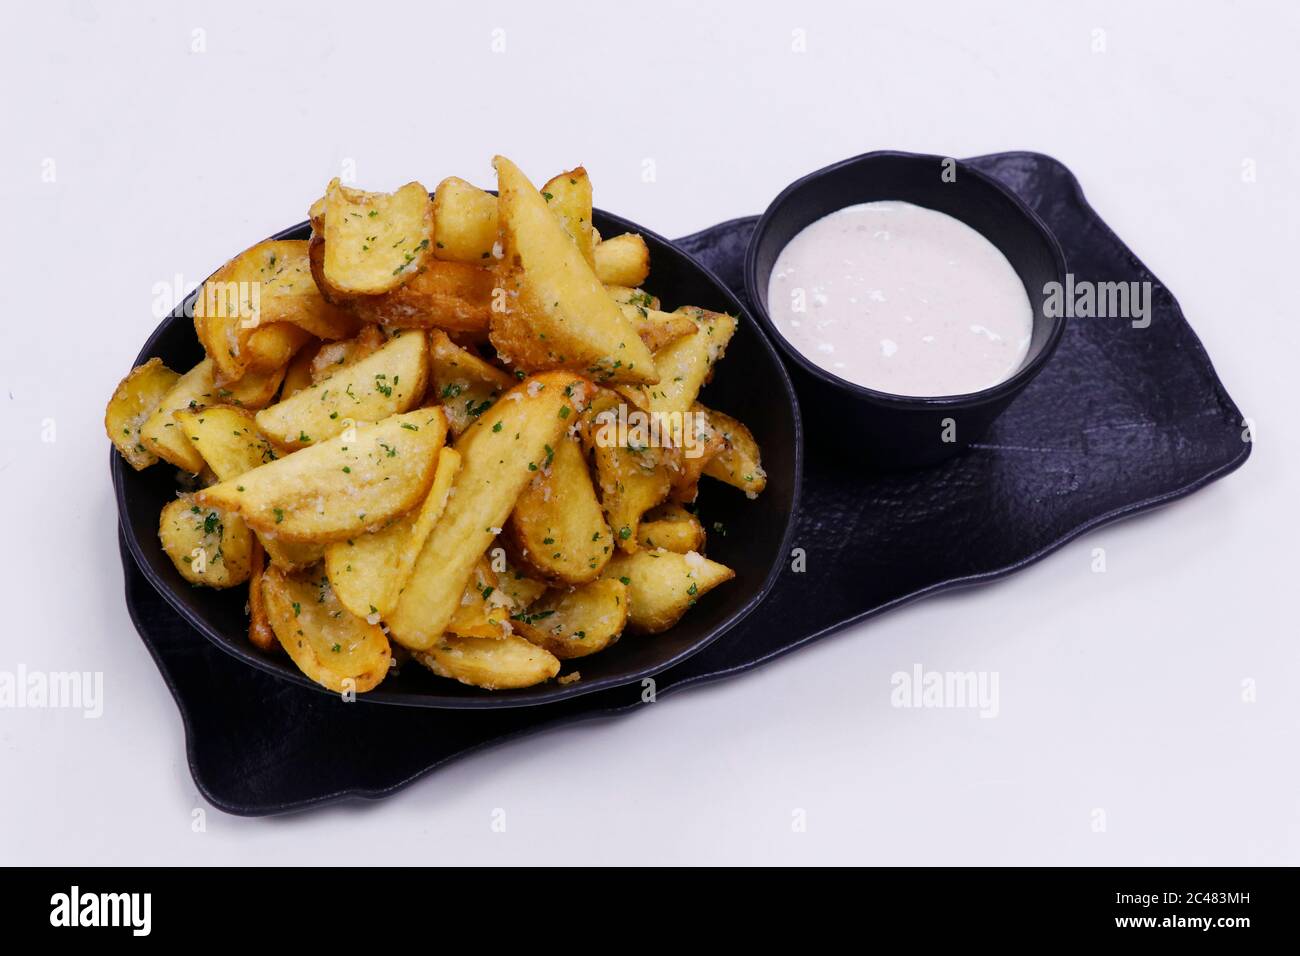 potato chips or wedges with truffle cream dip Stock Photo